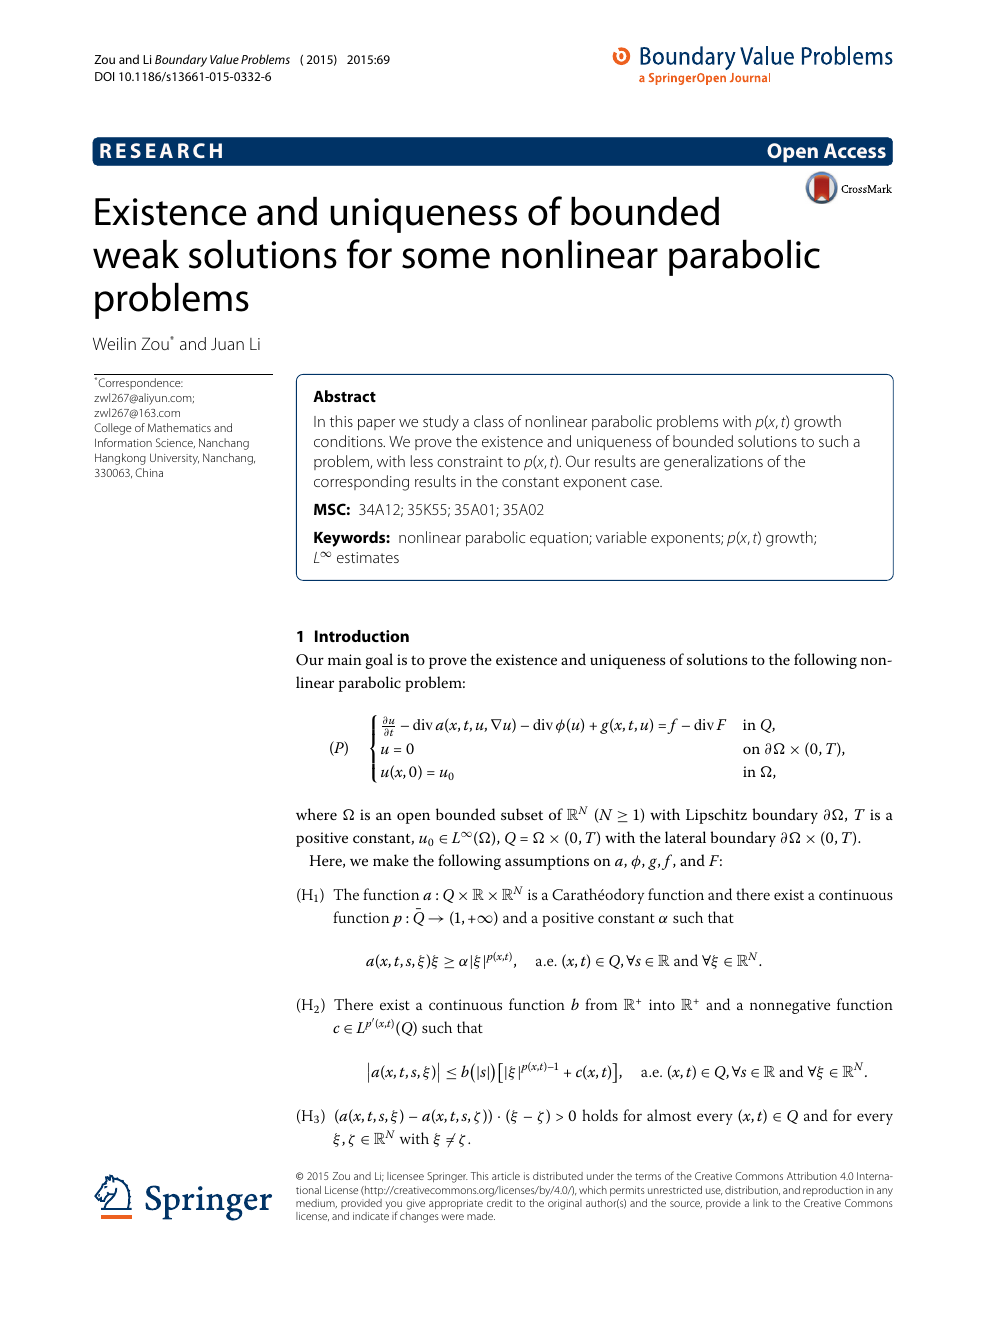 Existence And Uniqueness Of Bounded Weak Solutions For Some Nonlinear Parabolic Problems Topic Of Research Paper In Mathematics Download Scholarly Article Pdf And Read For Free On Cyberleninka Open Science Hub